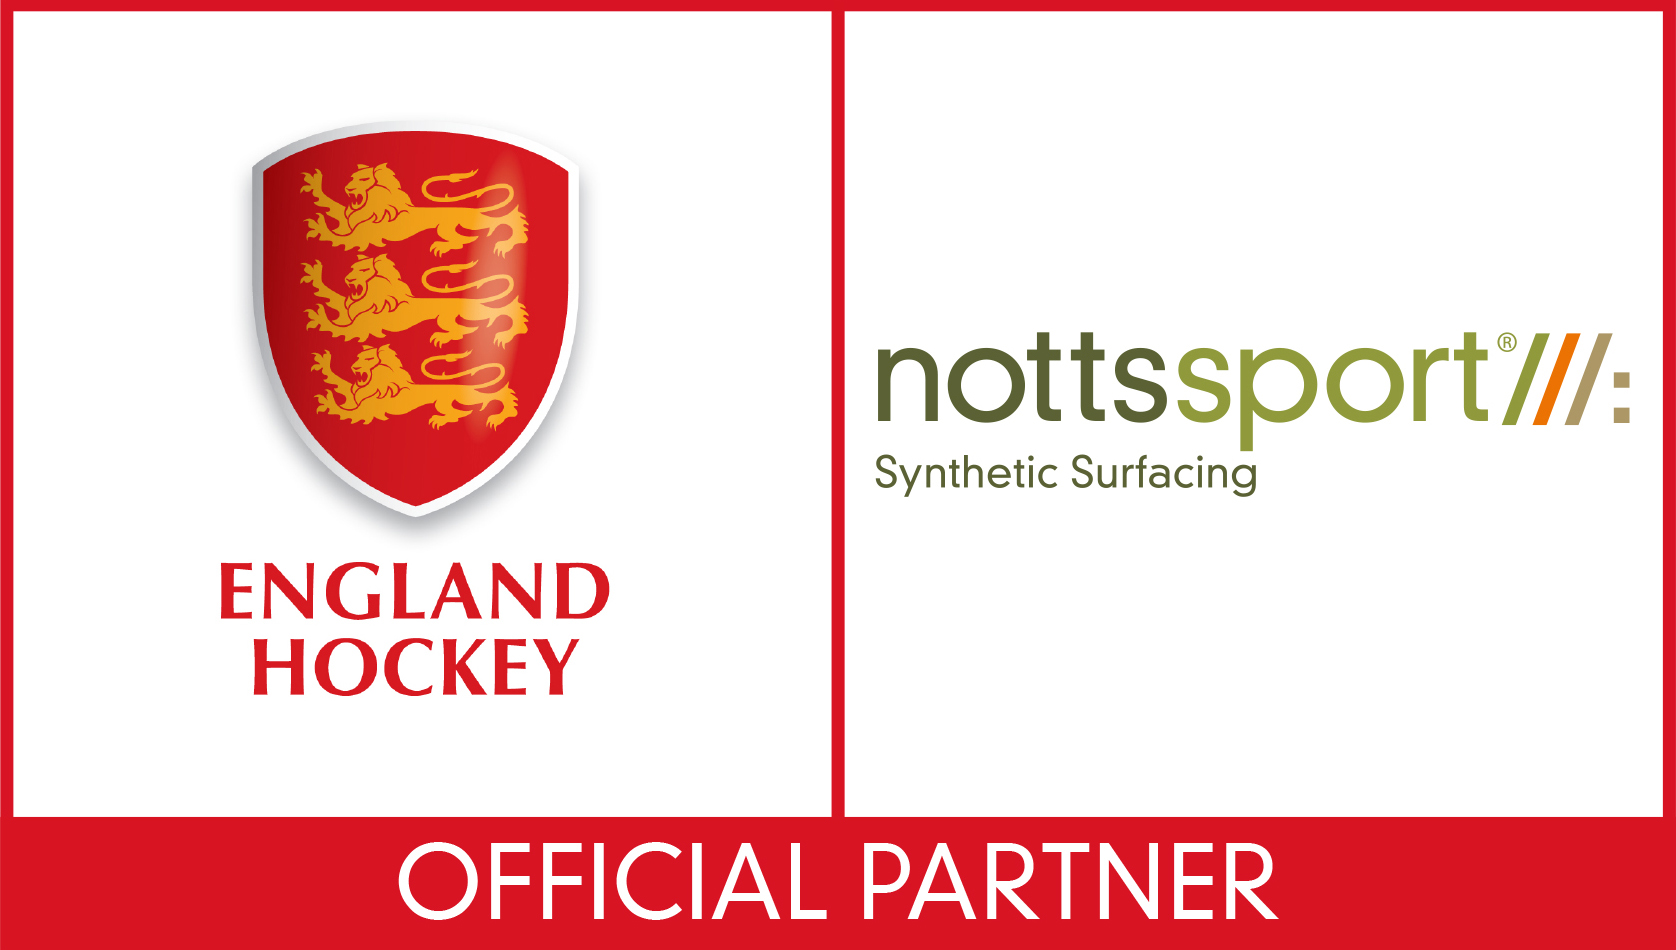 england-hockey_ns-official-partners-red-2014-no-border